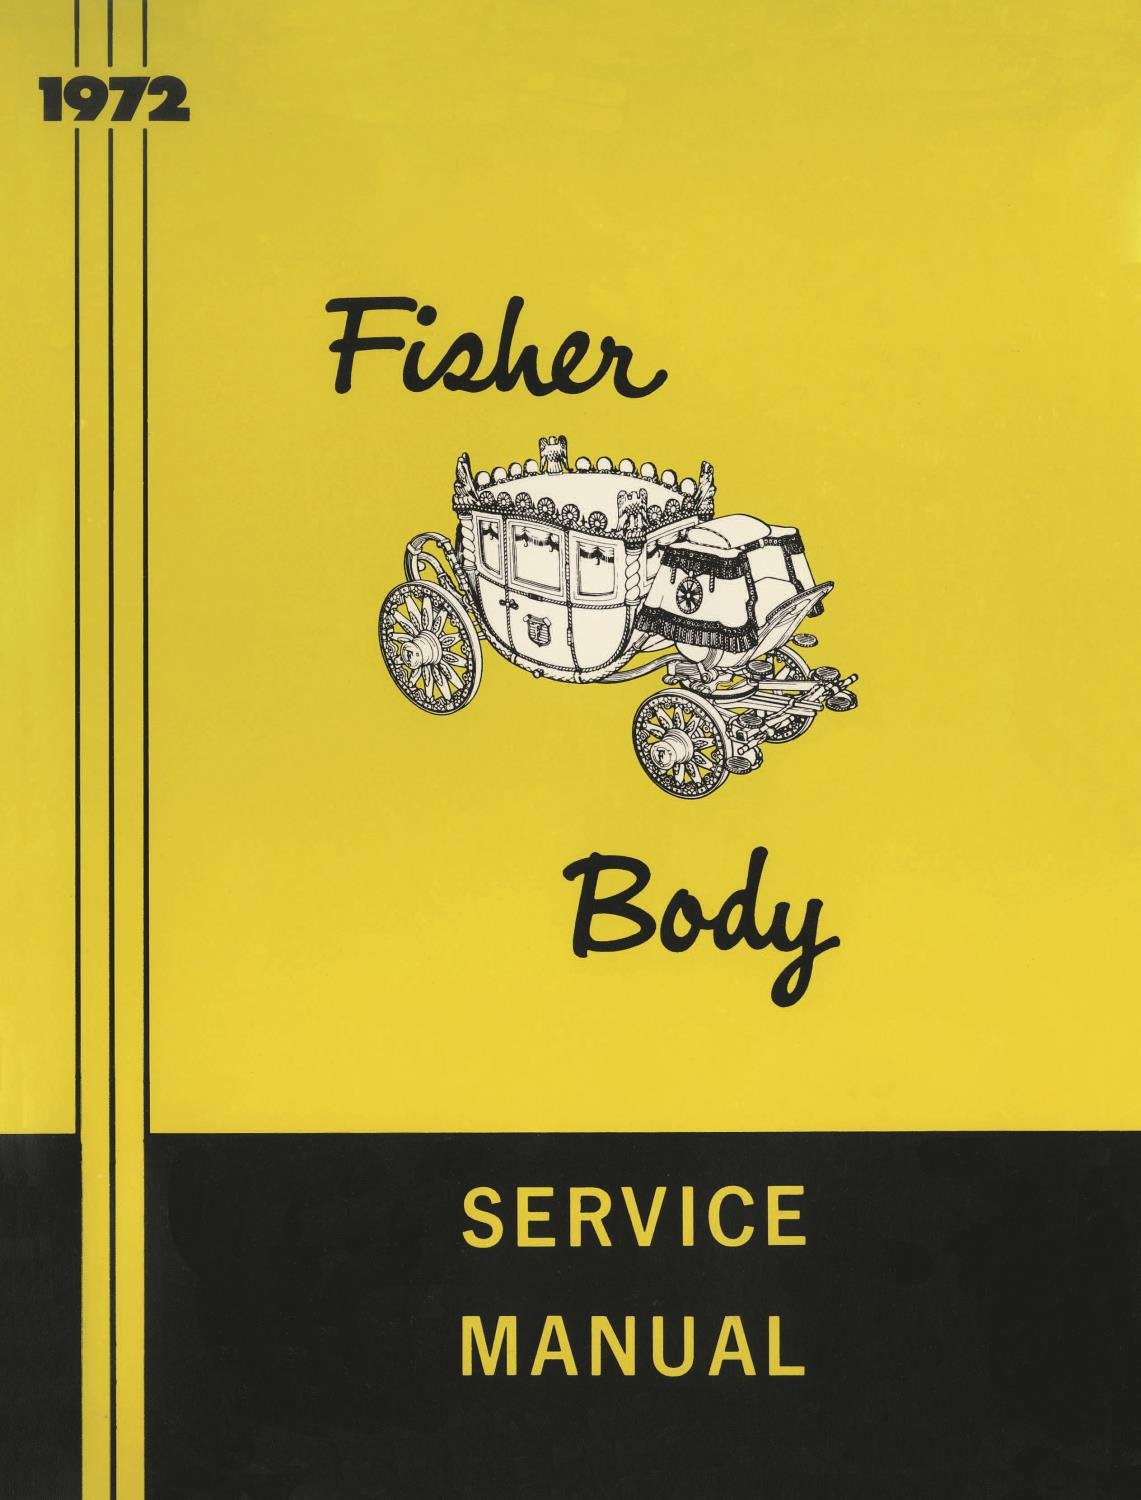 Fisher Body Service Manual for 1972 Buick, Cadillac, Chevrolet, Oldsmobile and Pontiac Models, A-B-C-D-E-F-H-X Body Styles